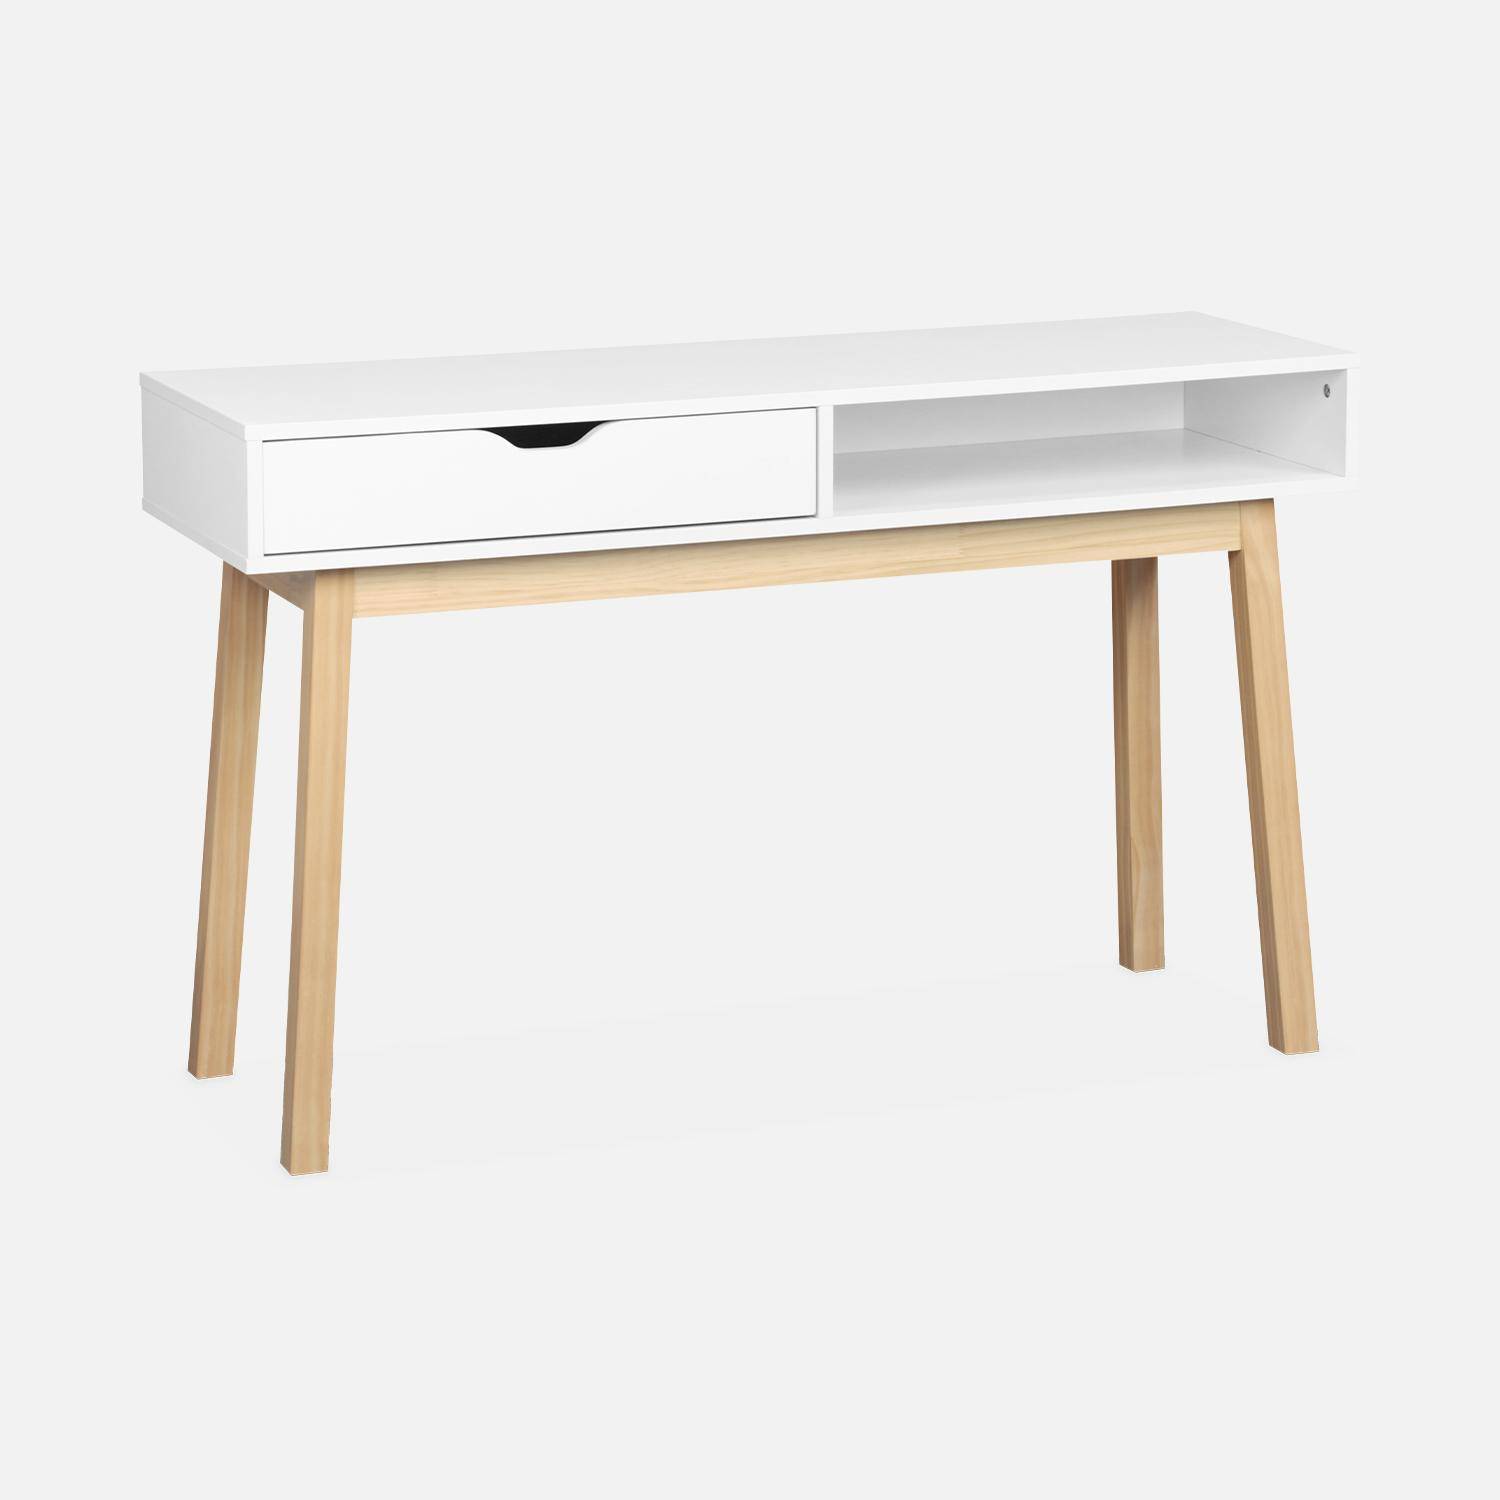 L119cm x W37cm x H74.5cm, Console with Wood Effect and Wooden Legs, 1 Drawer, white, ,sweeek,Photo3